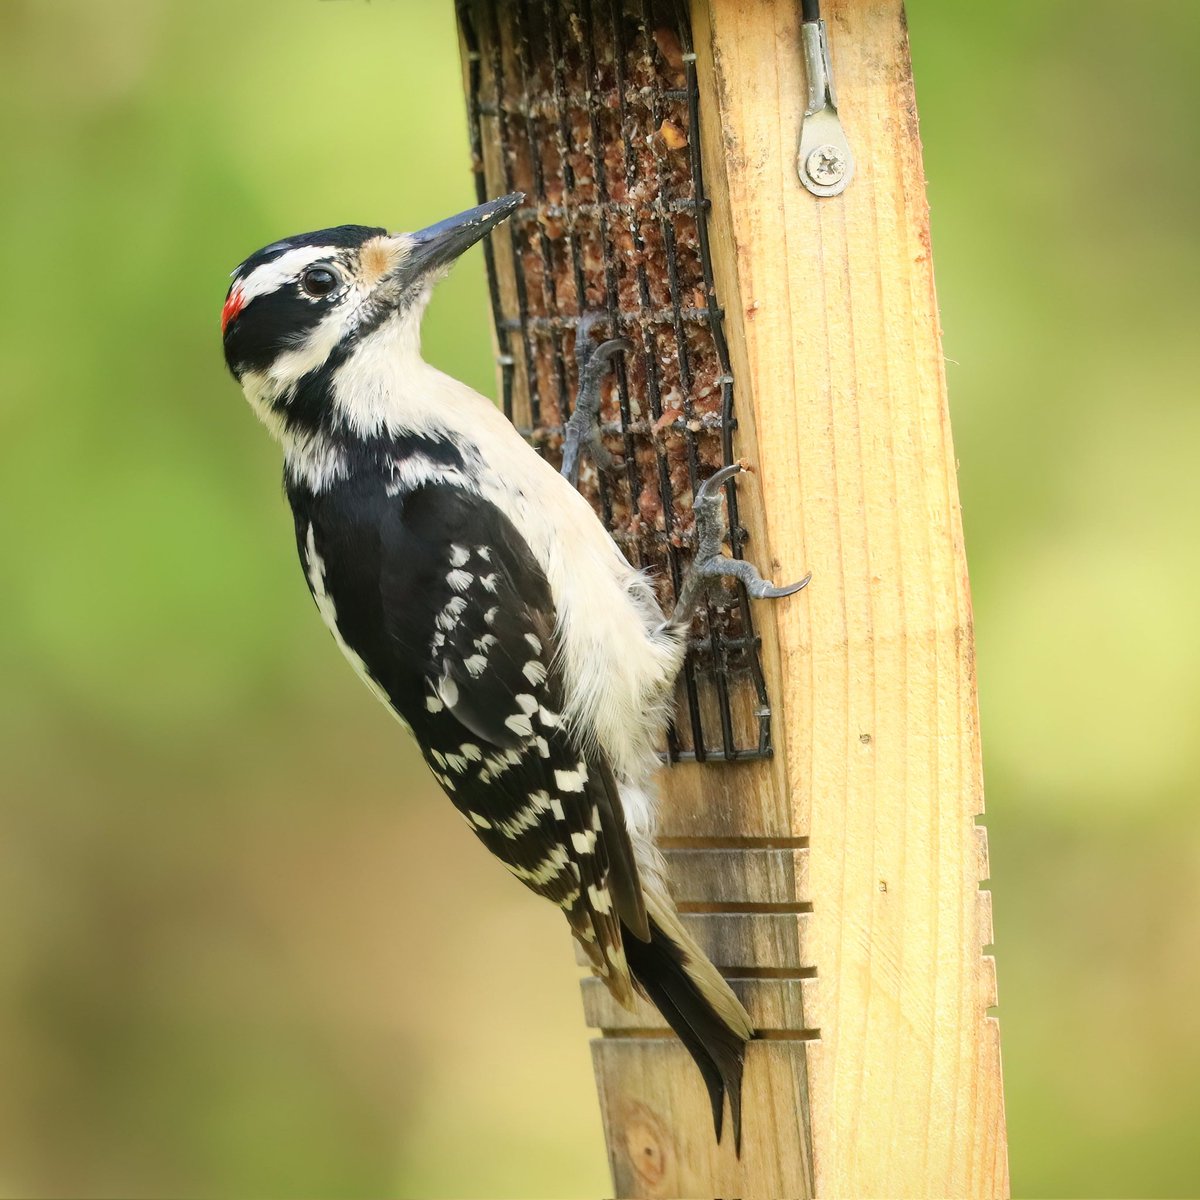 What a handsome hairy woodpecker! I think he definitely appreciates the stability of the tail-prop design.
#hairywoodpeckers #tailprop #hairywoodpecker #handsome #woodpeckers #woodpecker #cedarfeeders #cedarfeeder #suet #suetfeeders #suetfeeder